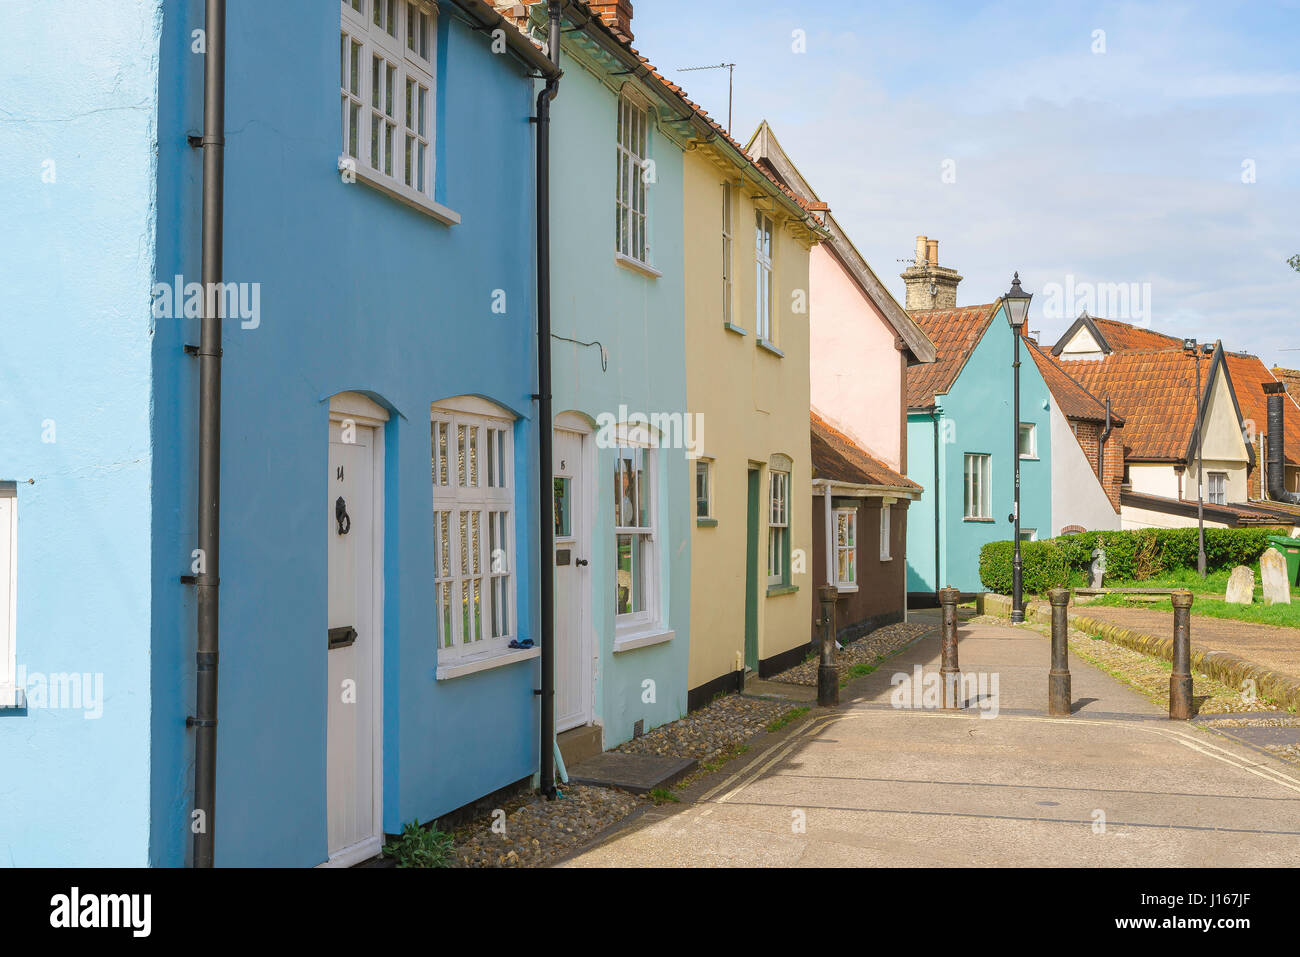 Halesworth Suffolk, view of colourful cottages in the centre of the rural Suffolk town of Halesworth, England UK Stock Photo